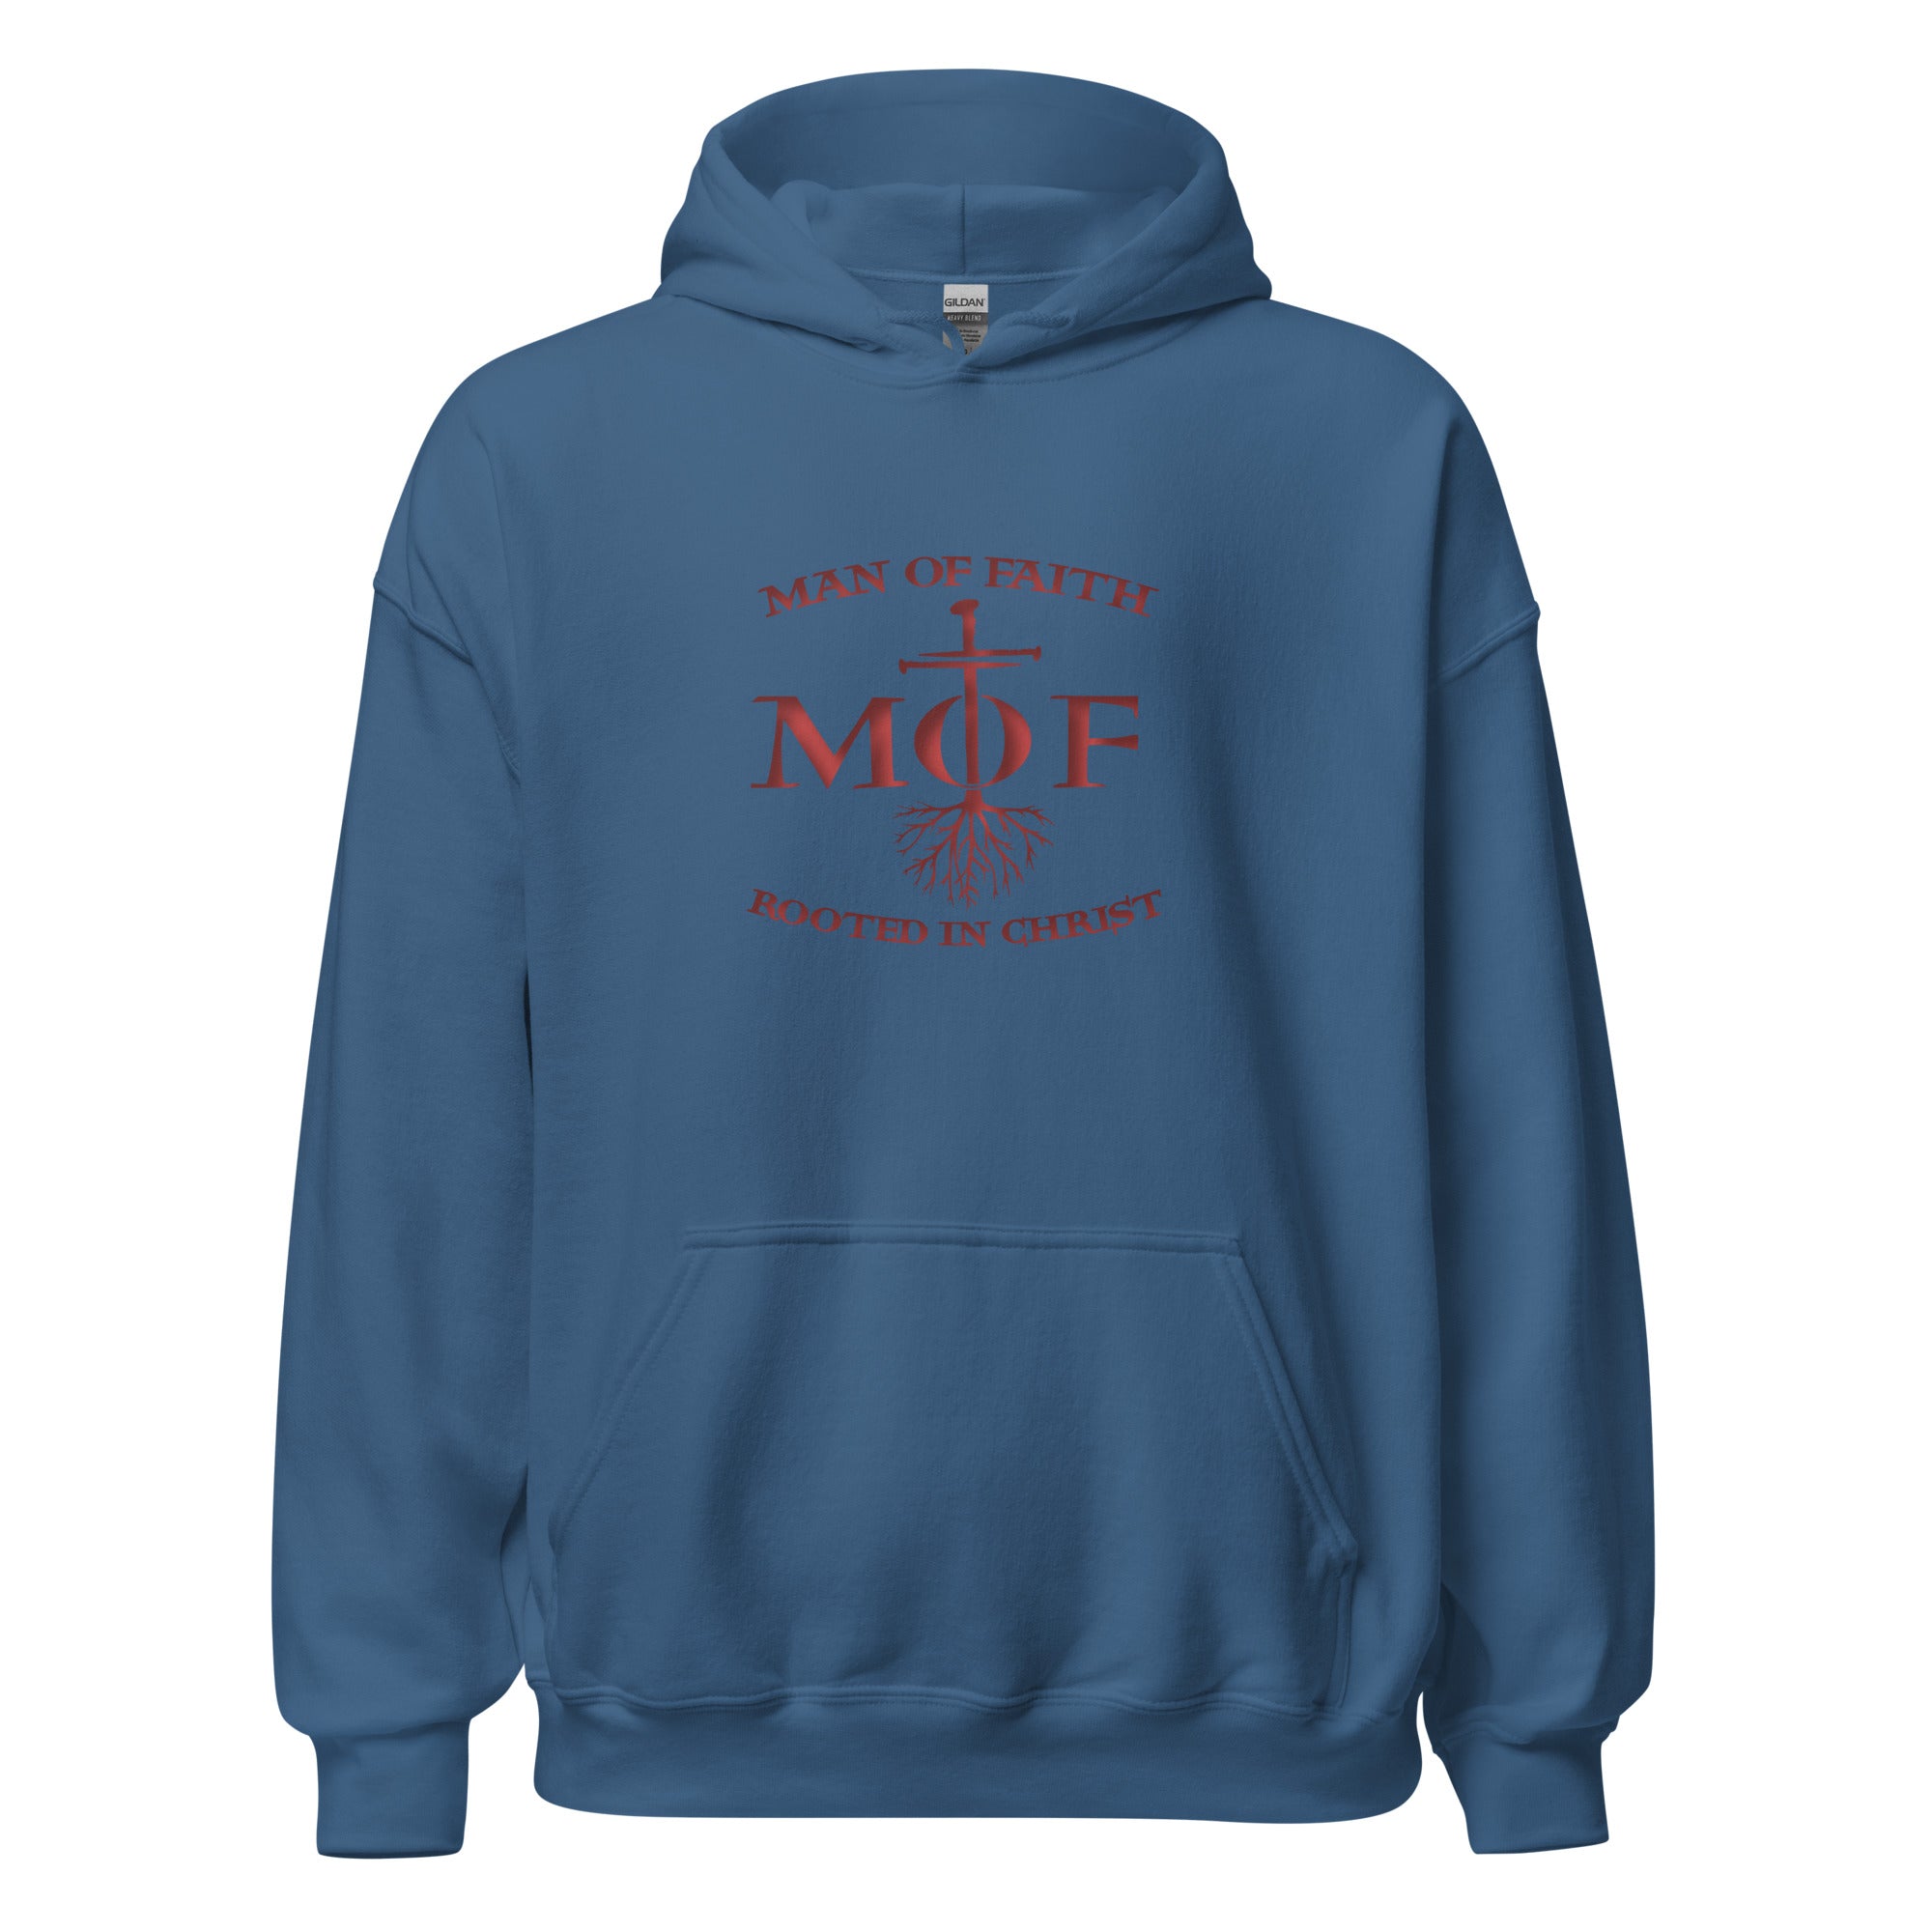 Man Of Faith Rooted In Christ Hoodie